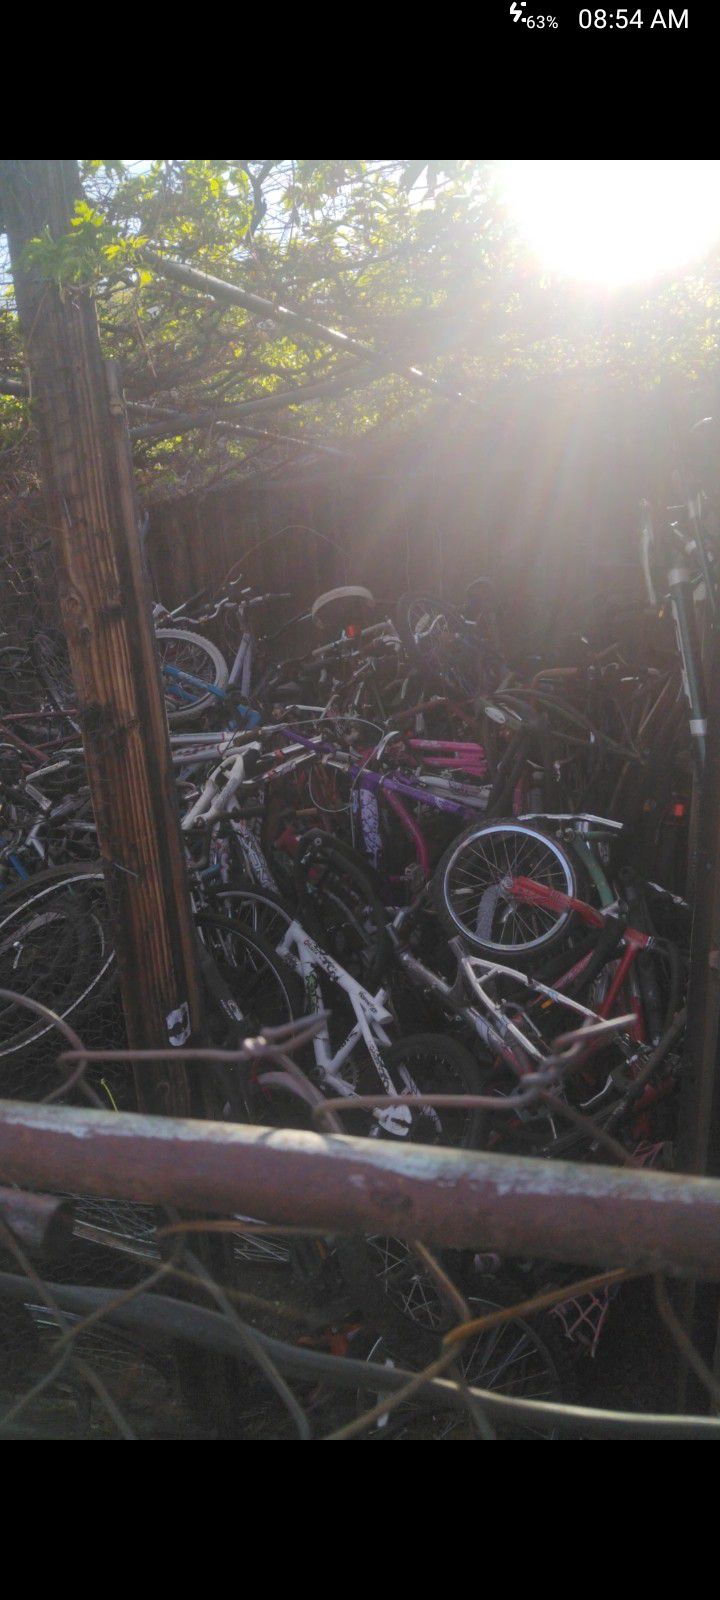 Bikes And More Bikes. BMX's Schwinn's And More. Vary  From $20 To $100 Each. 